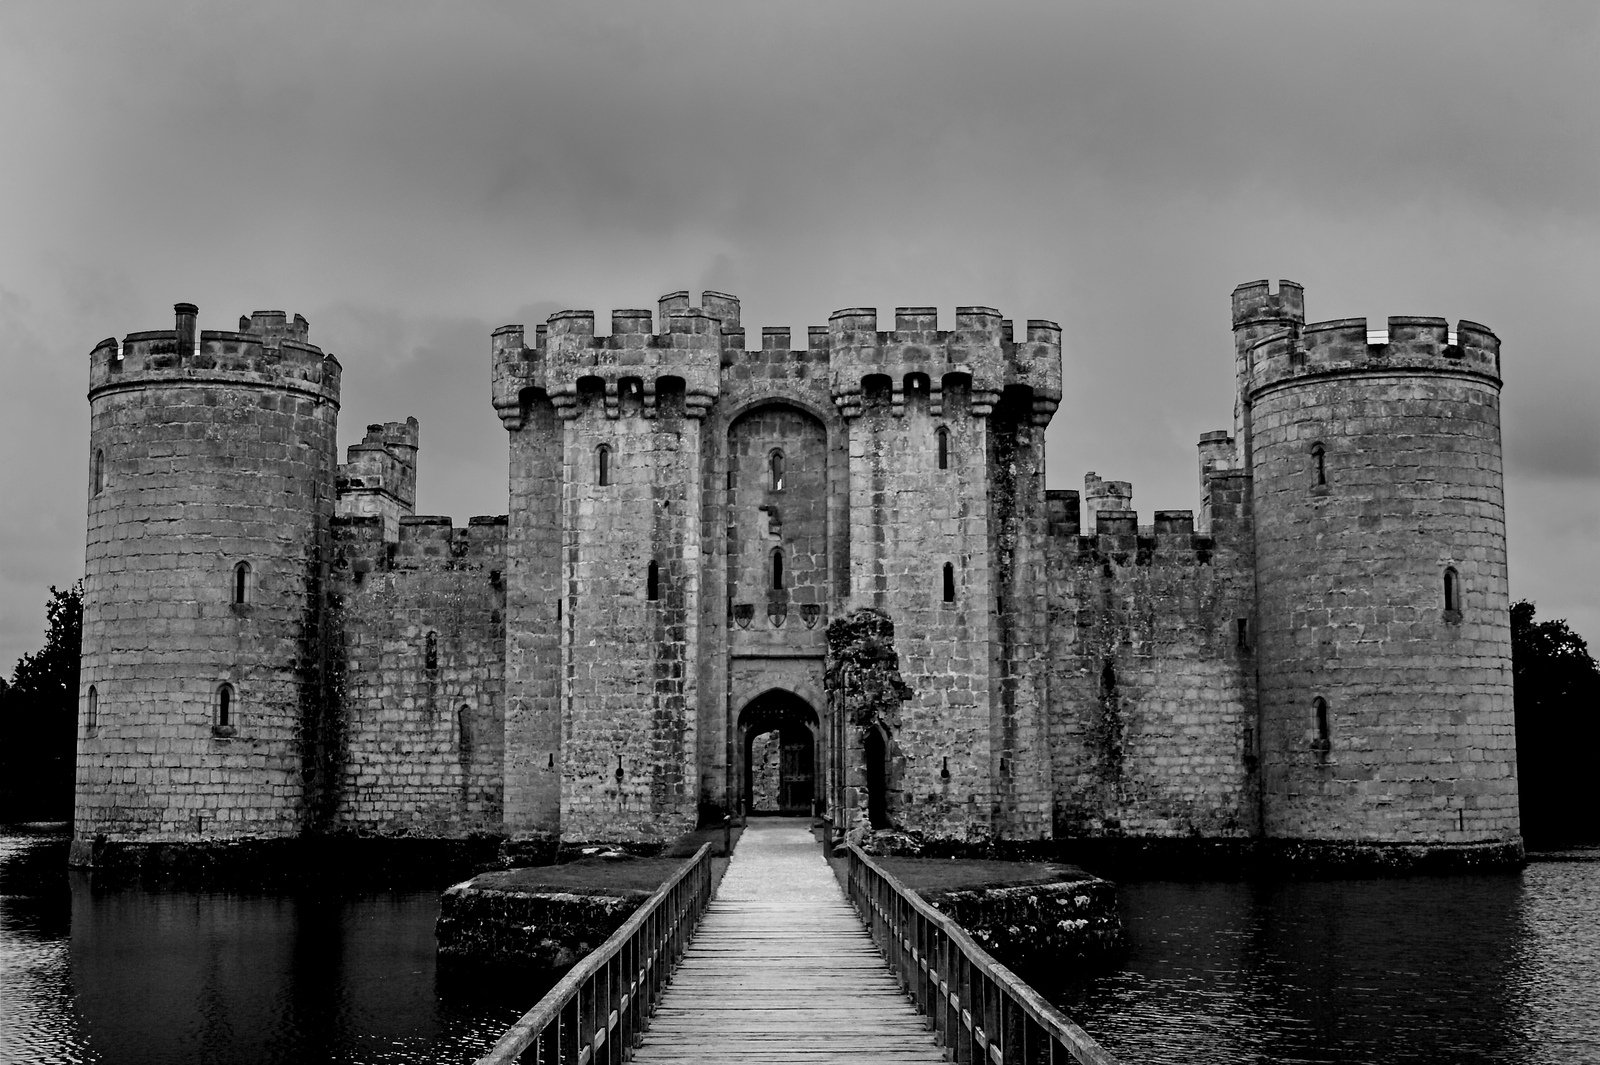 a black and white po of a bridge leading to some medieval castles